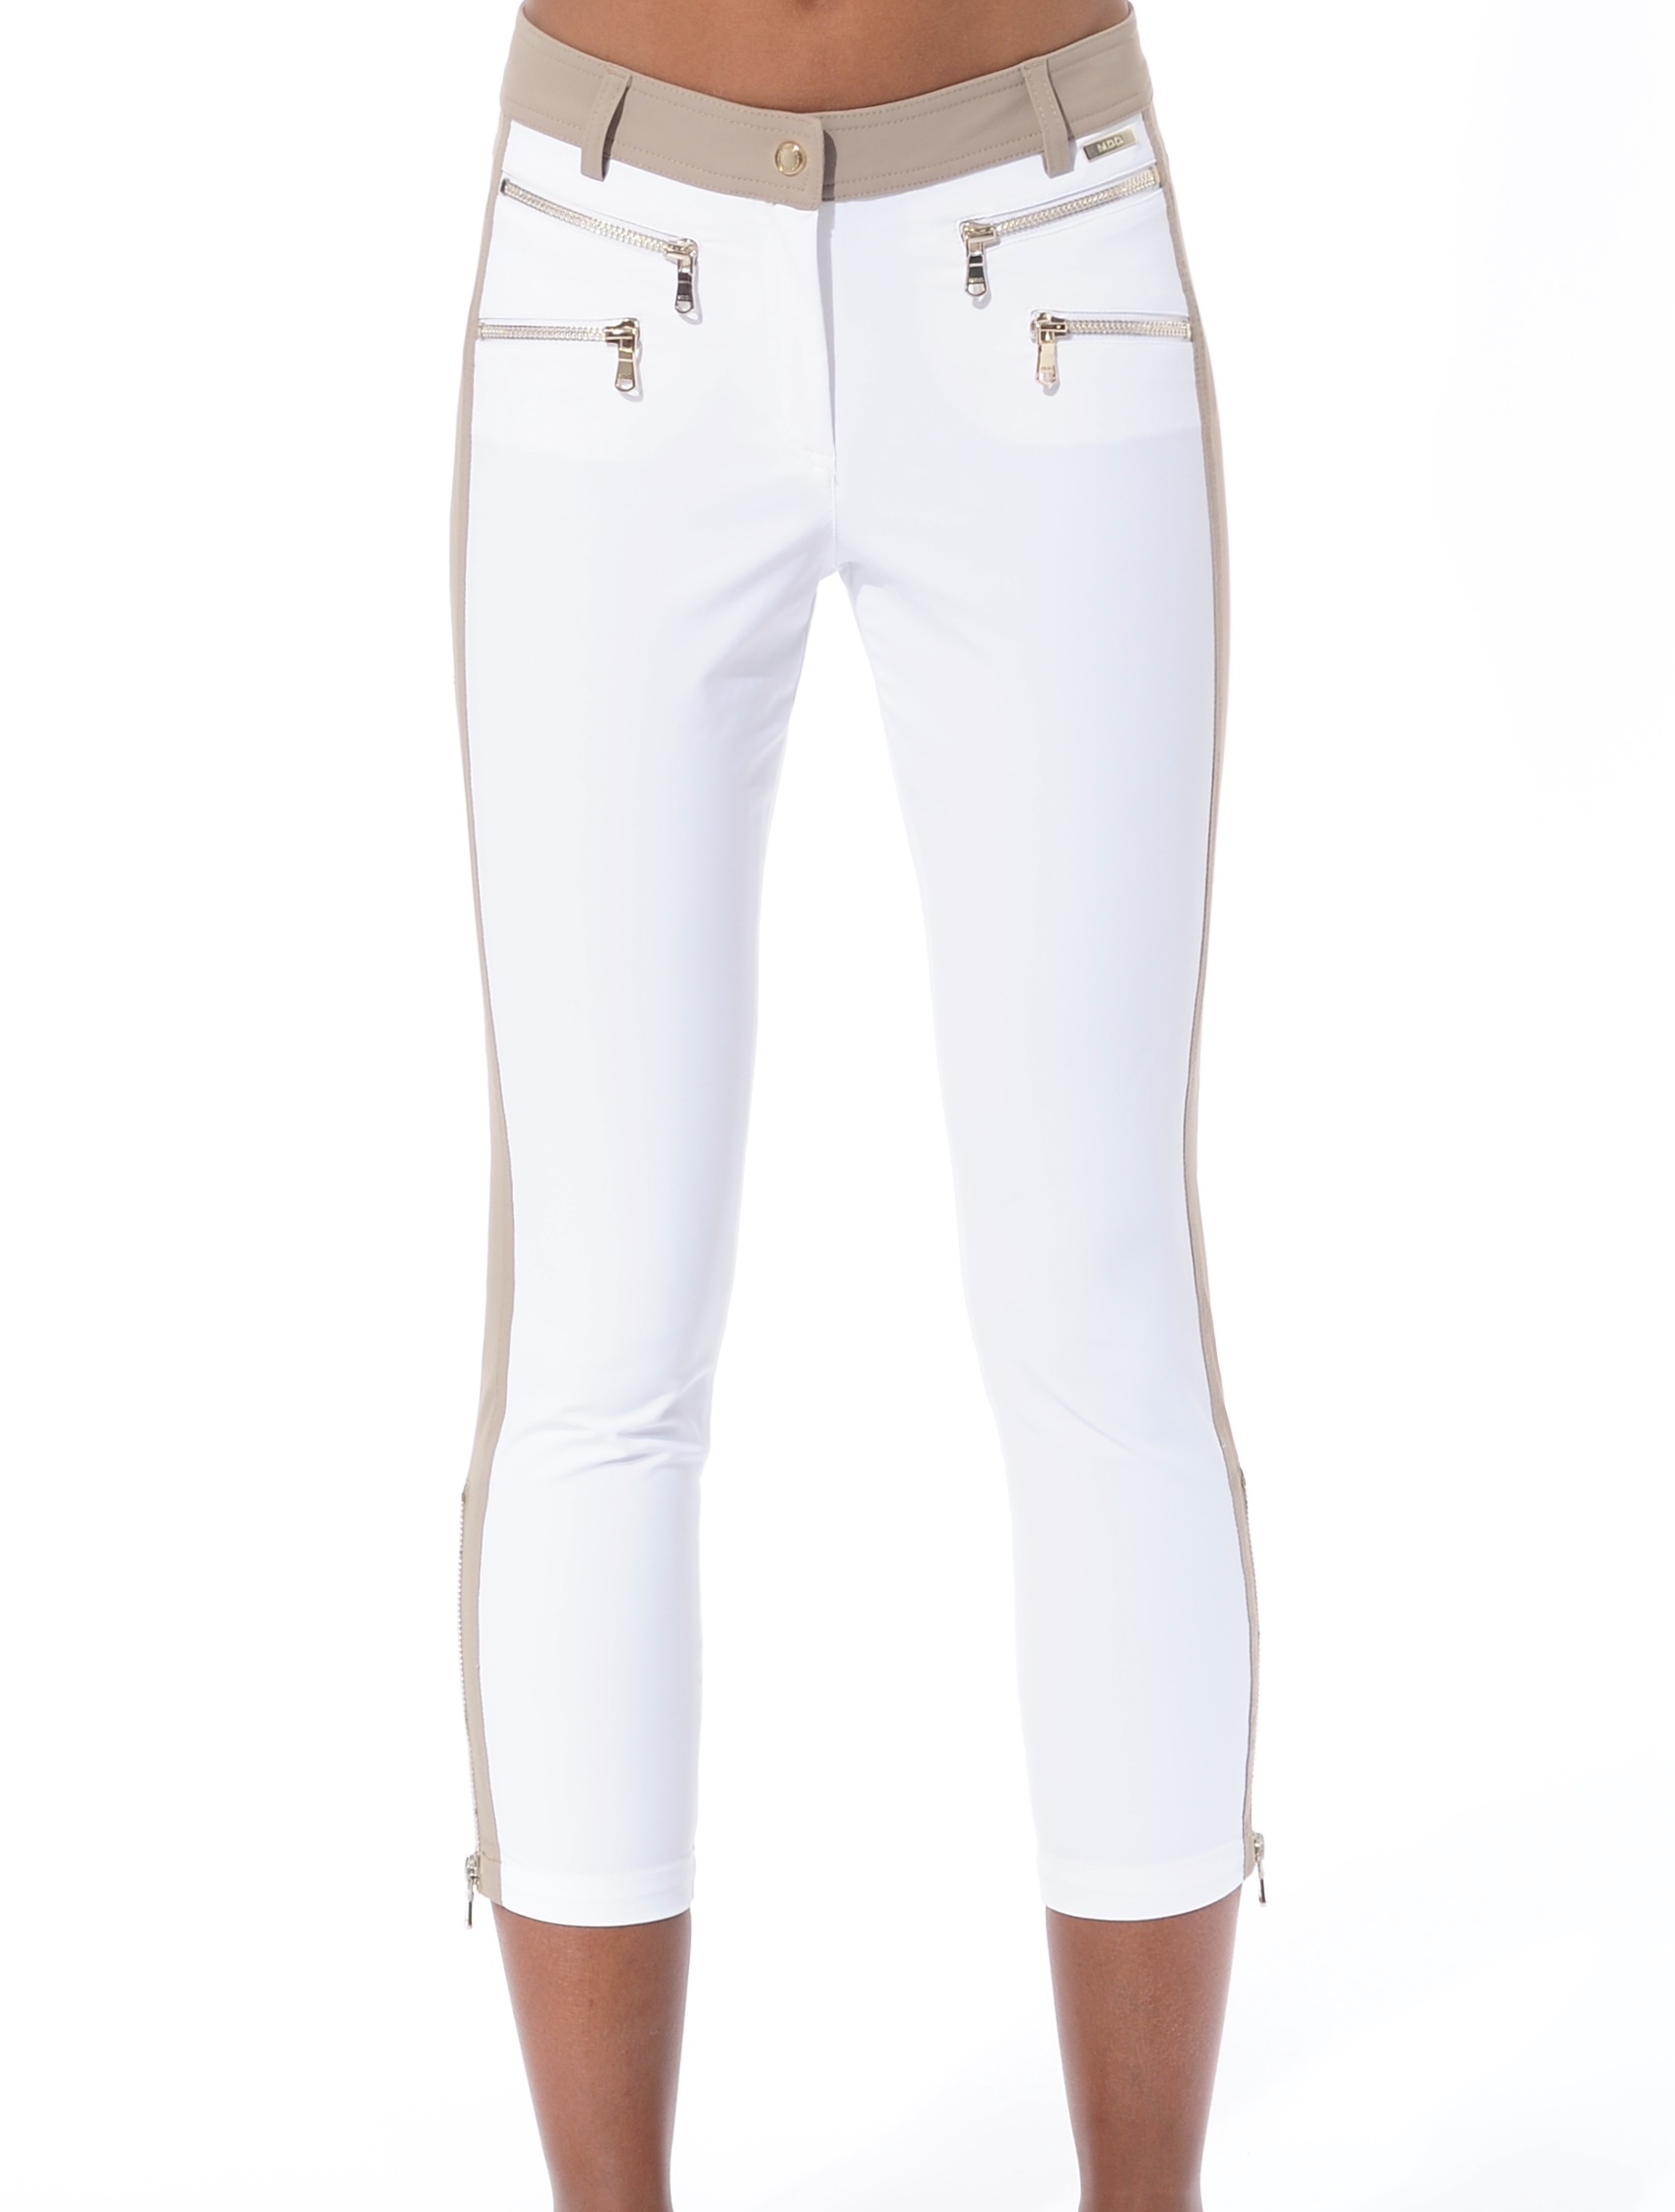 4way stretch double zip cropped pants white/taupe 